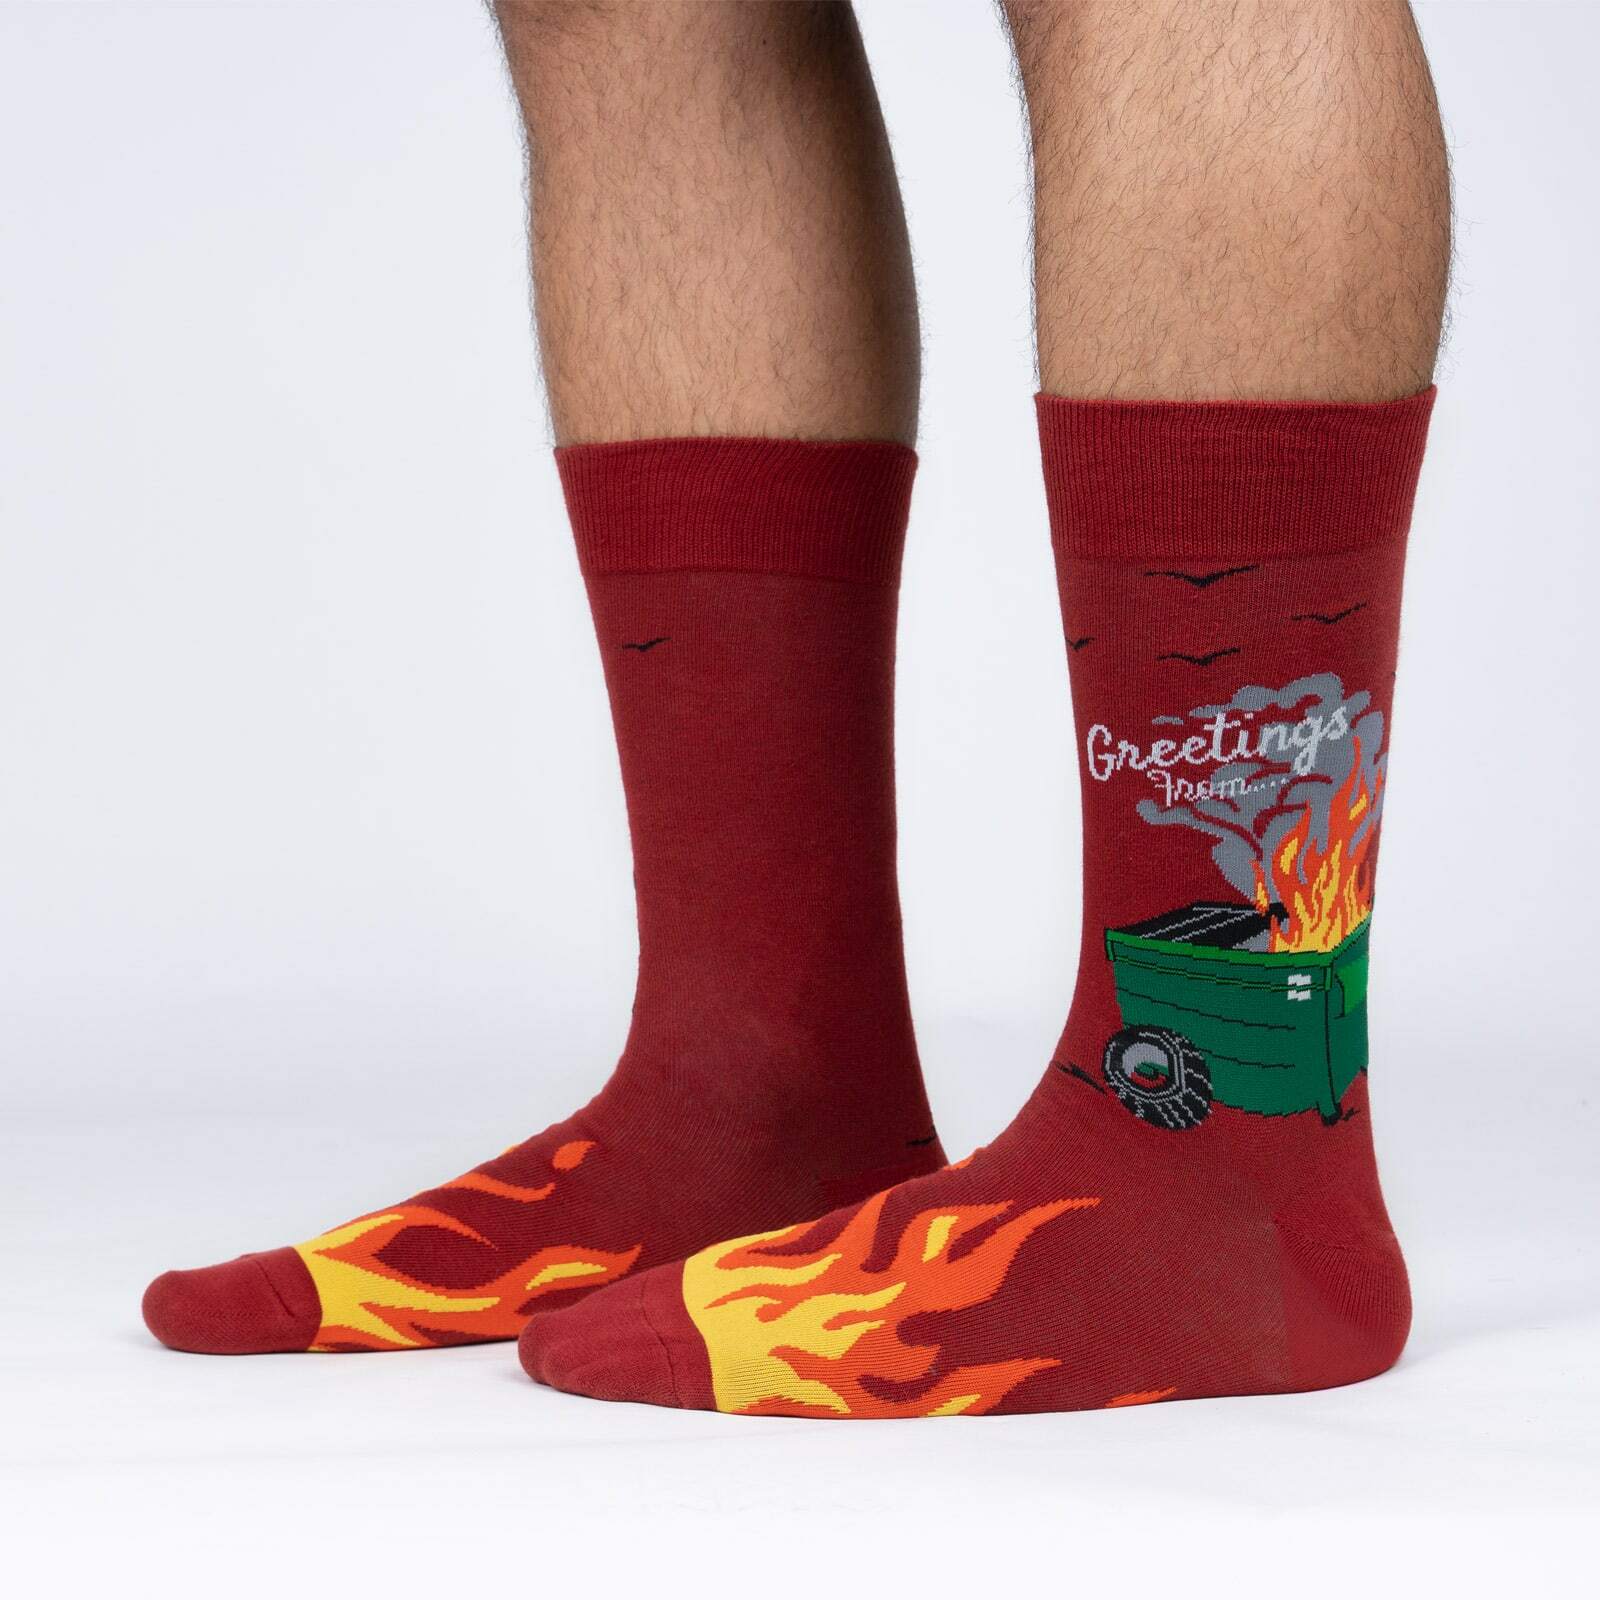 Sock It To Me Dumpster Fire men's crew sock featuring red sock with the words "Greetings form ..." over a green garbage dumpster on fire. Socks worn by model seen from the side. 